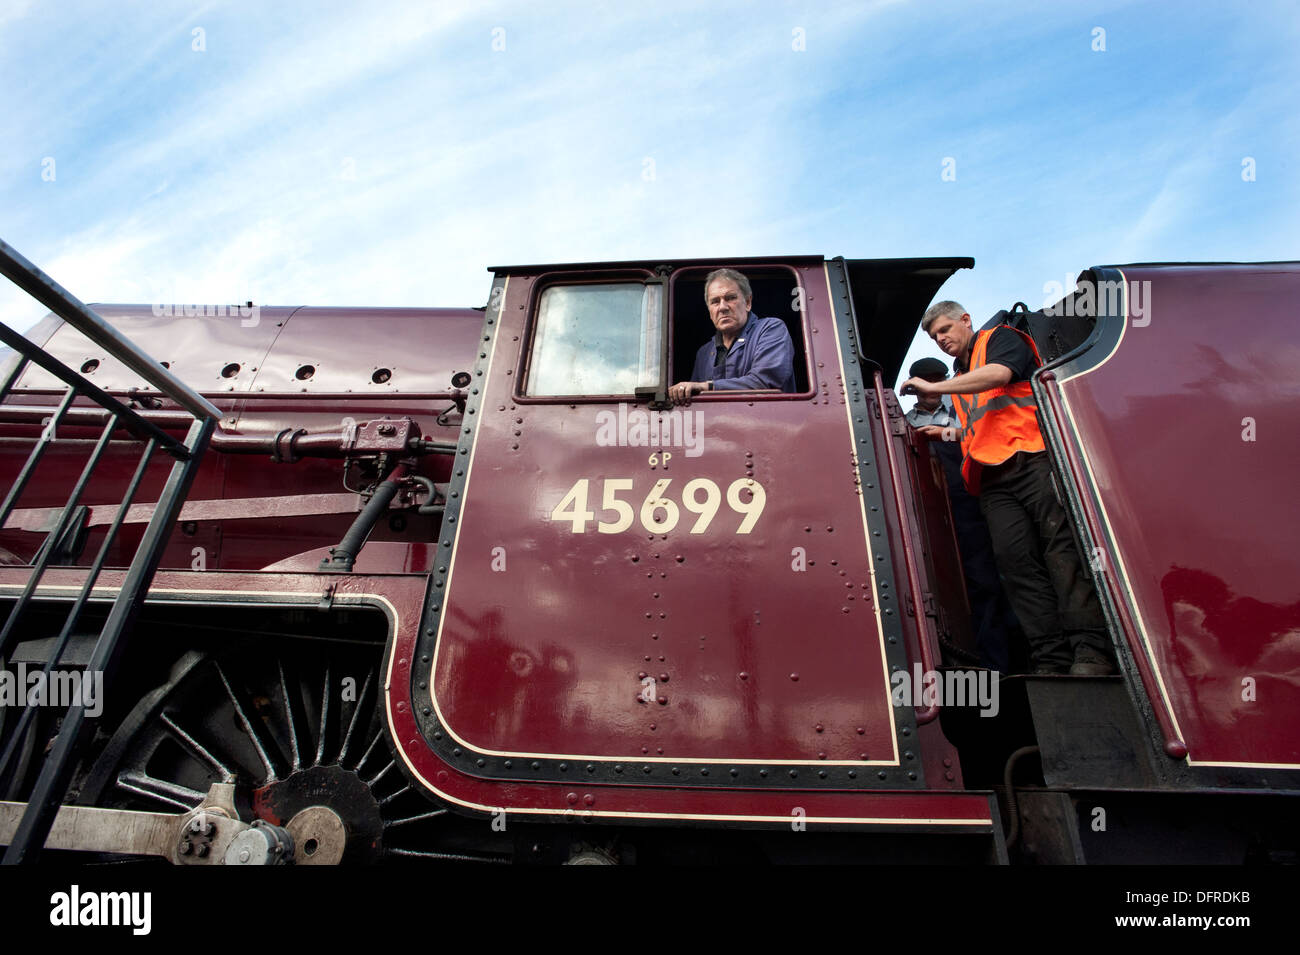 The driver and fireman of an LMS ( London Midland Scottish ) Jubilee class steam locomotive 45699 'Galatea', at 'Locomotion', part of the NRM's exhibition at the National Railway Museums Shildon museum. Stock Photo